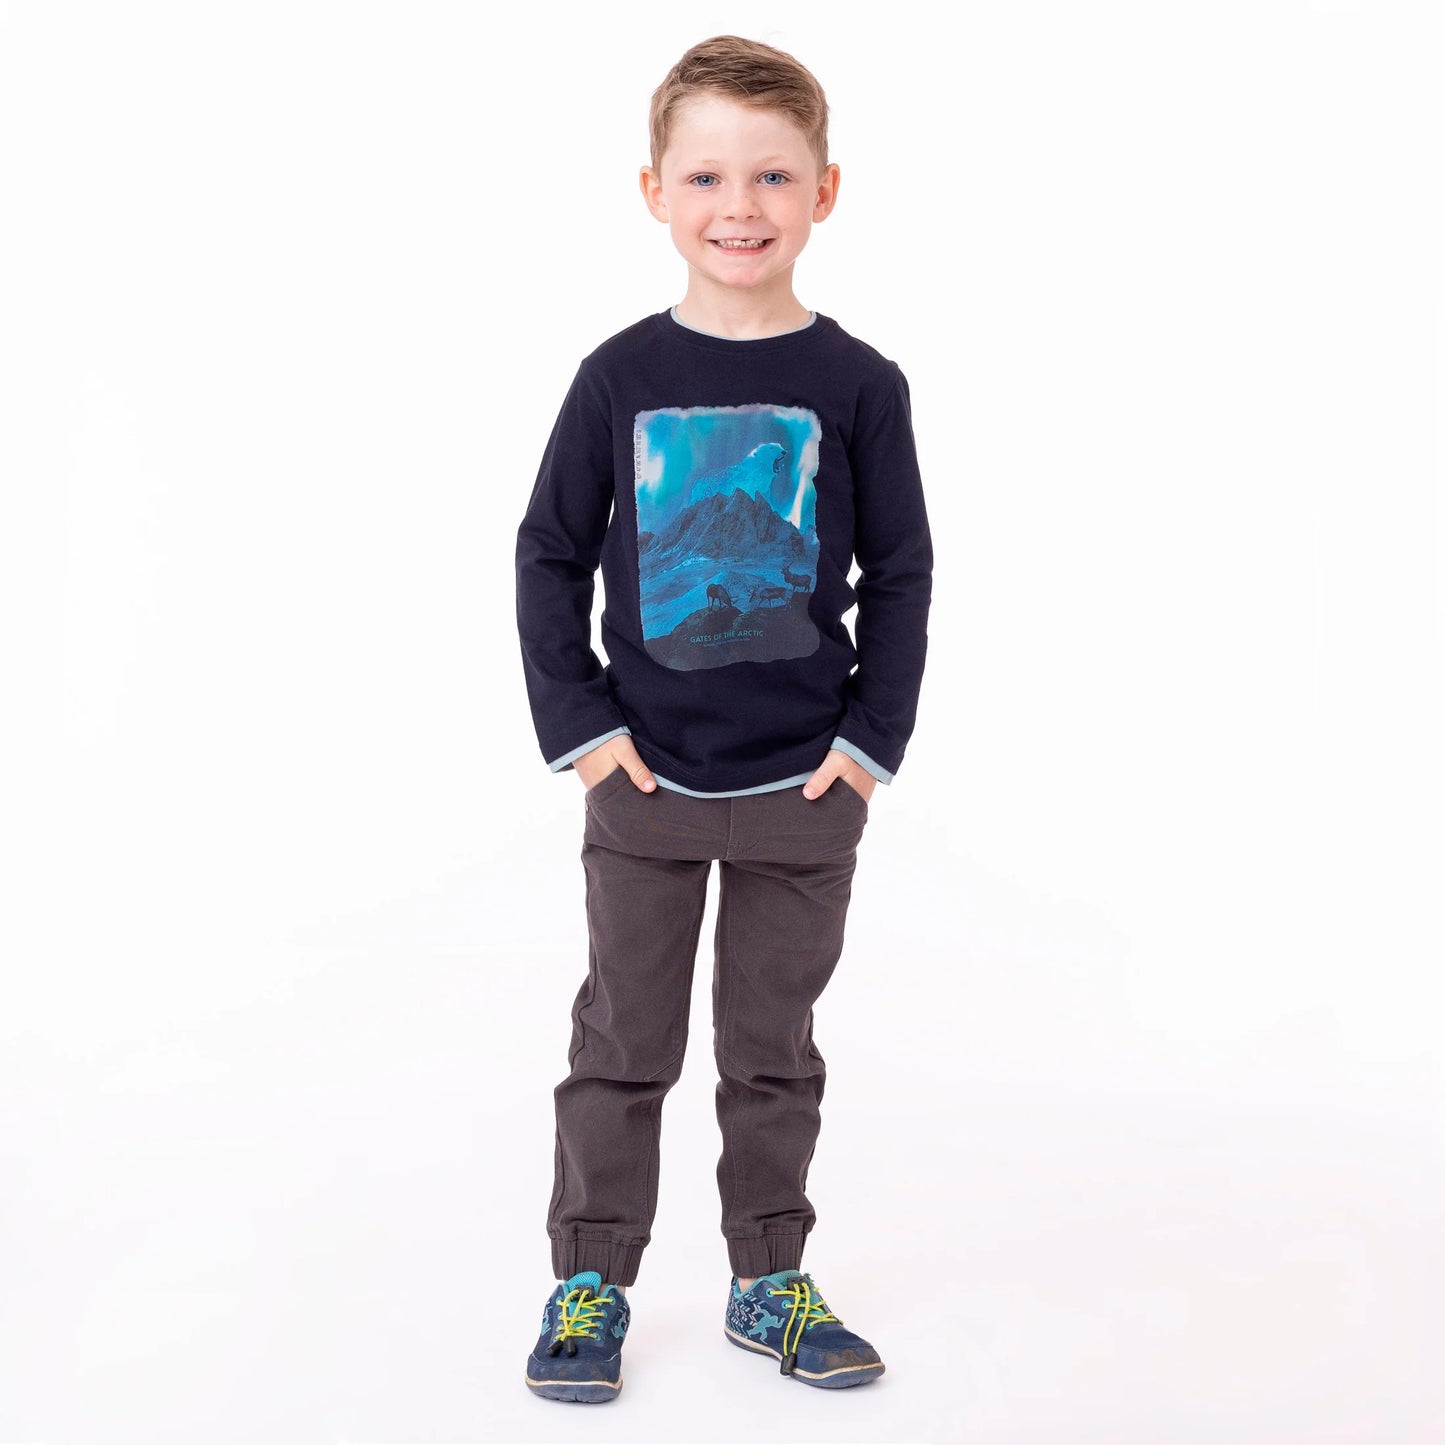 Nanö long-sleeved T-shirt for boys 2 to 6 years